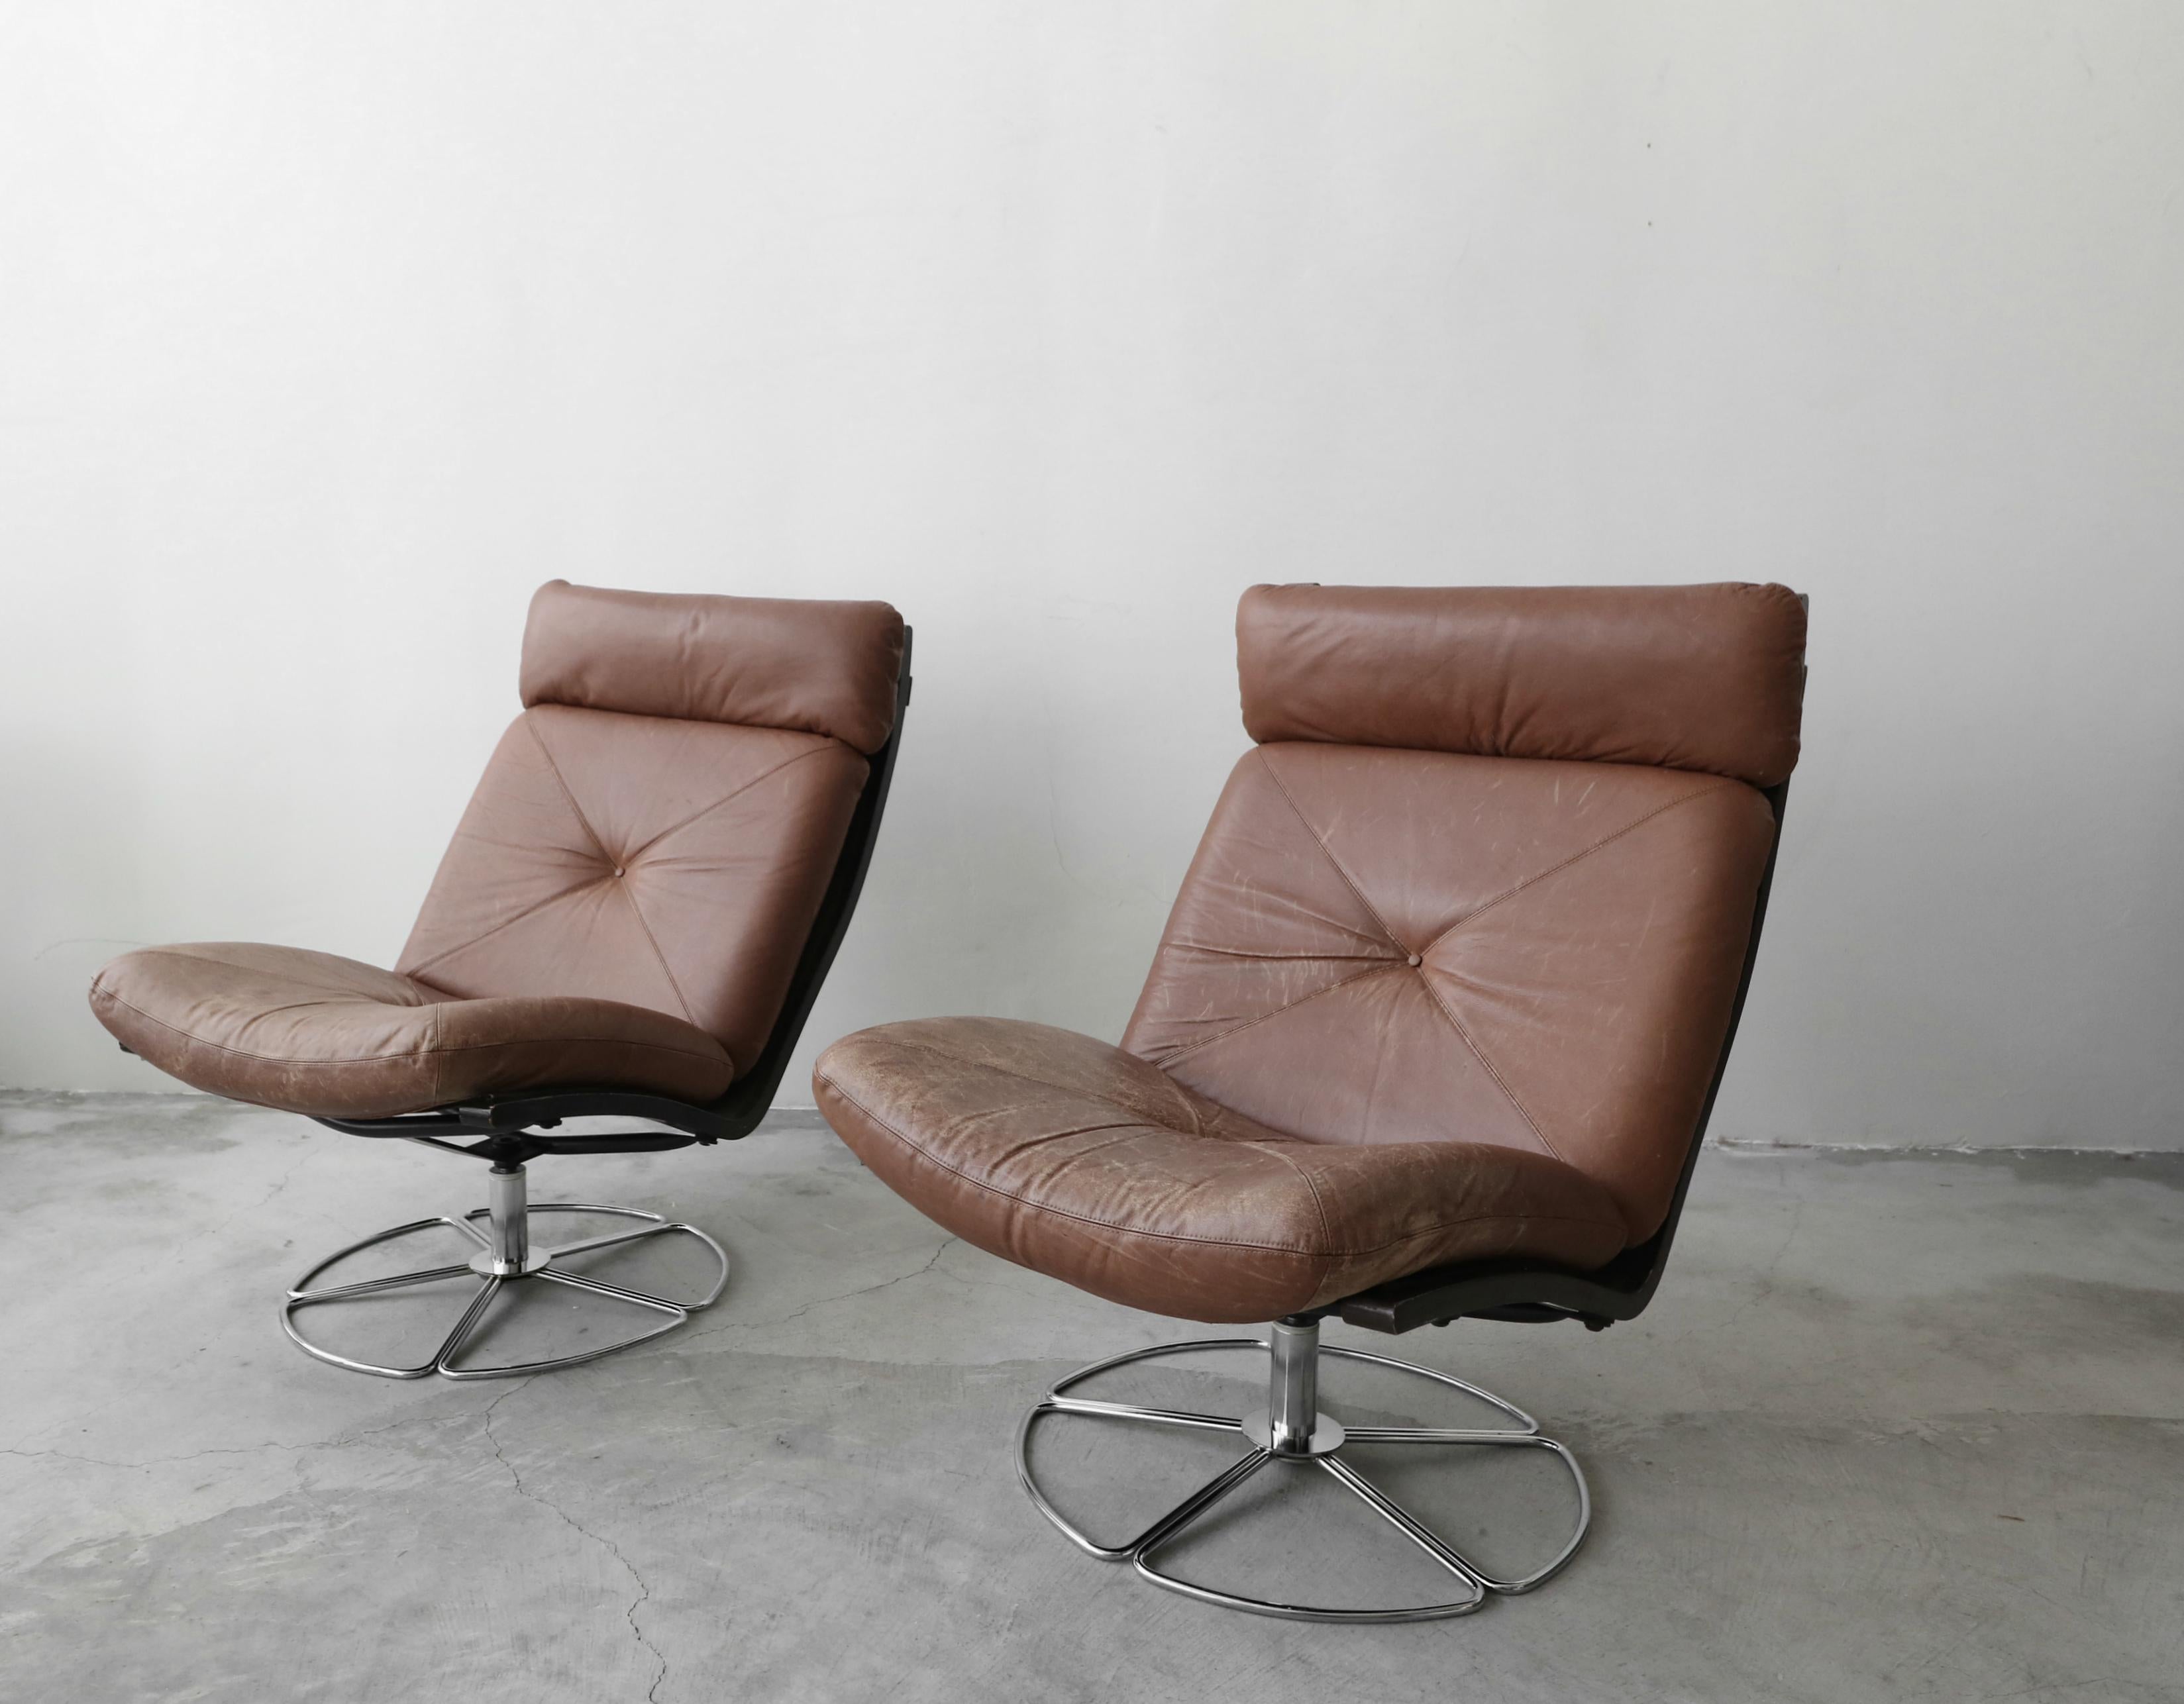 A simple yet sophisticated pair of 1970s vintage leather swivel chairs. Chairs have beautiful patina on the leather giving them lots of that age appropriate character. The chairs are in great condition for their age. Leather is worn but not damaged